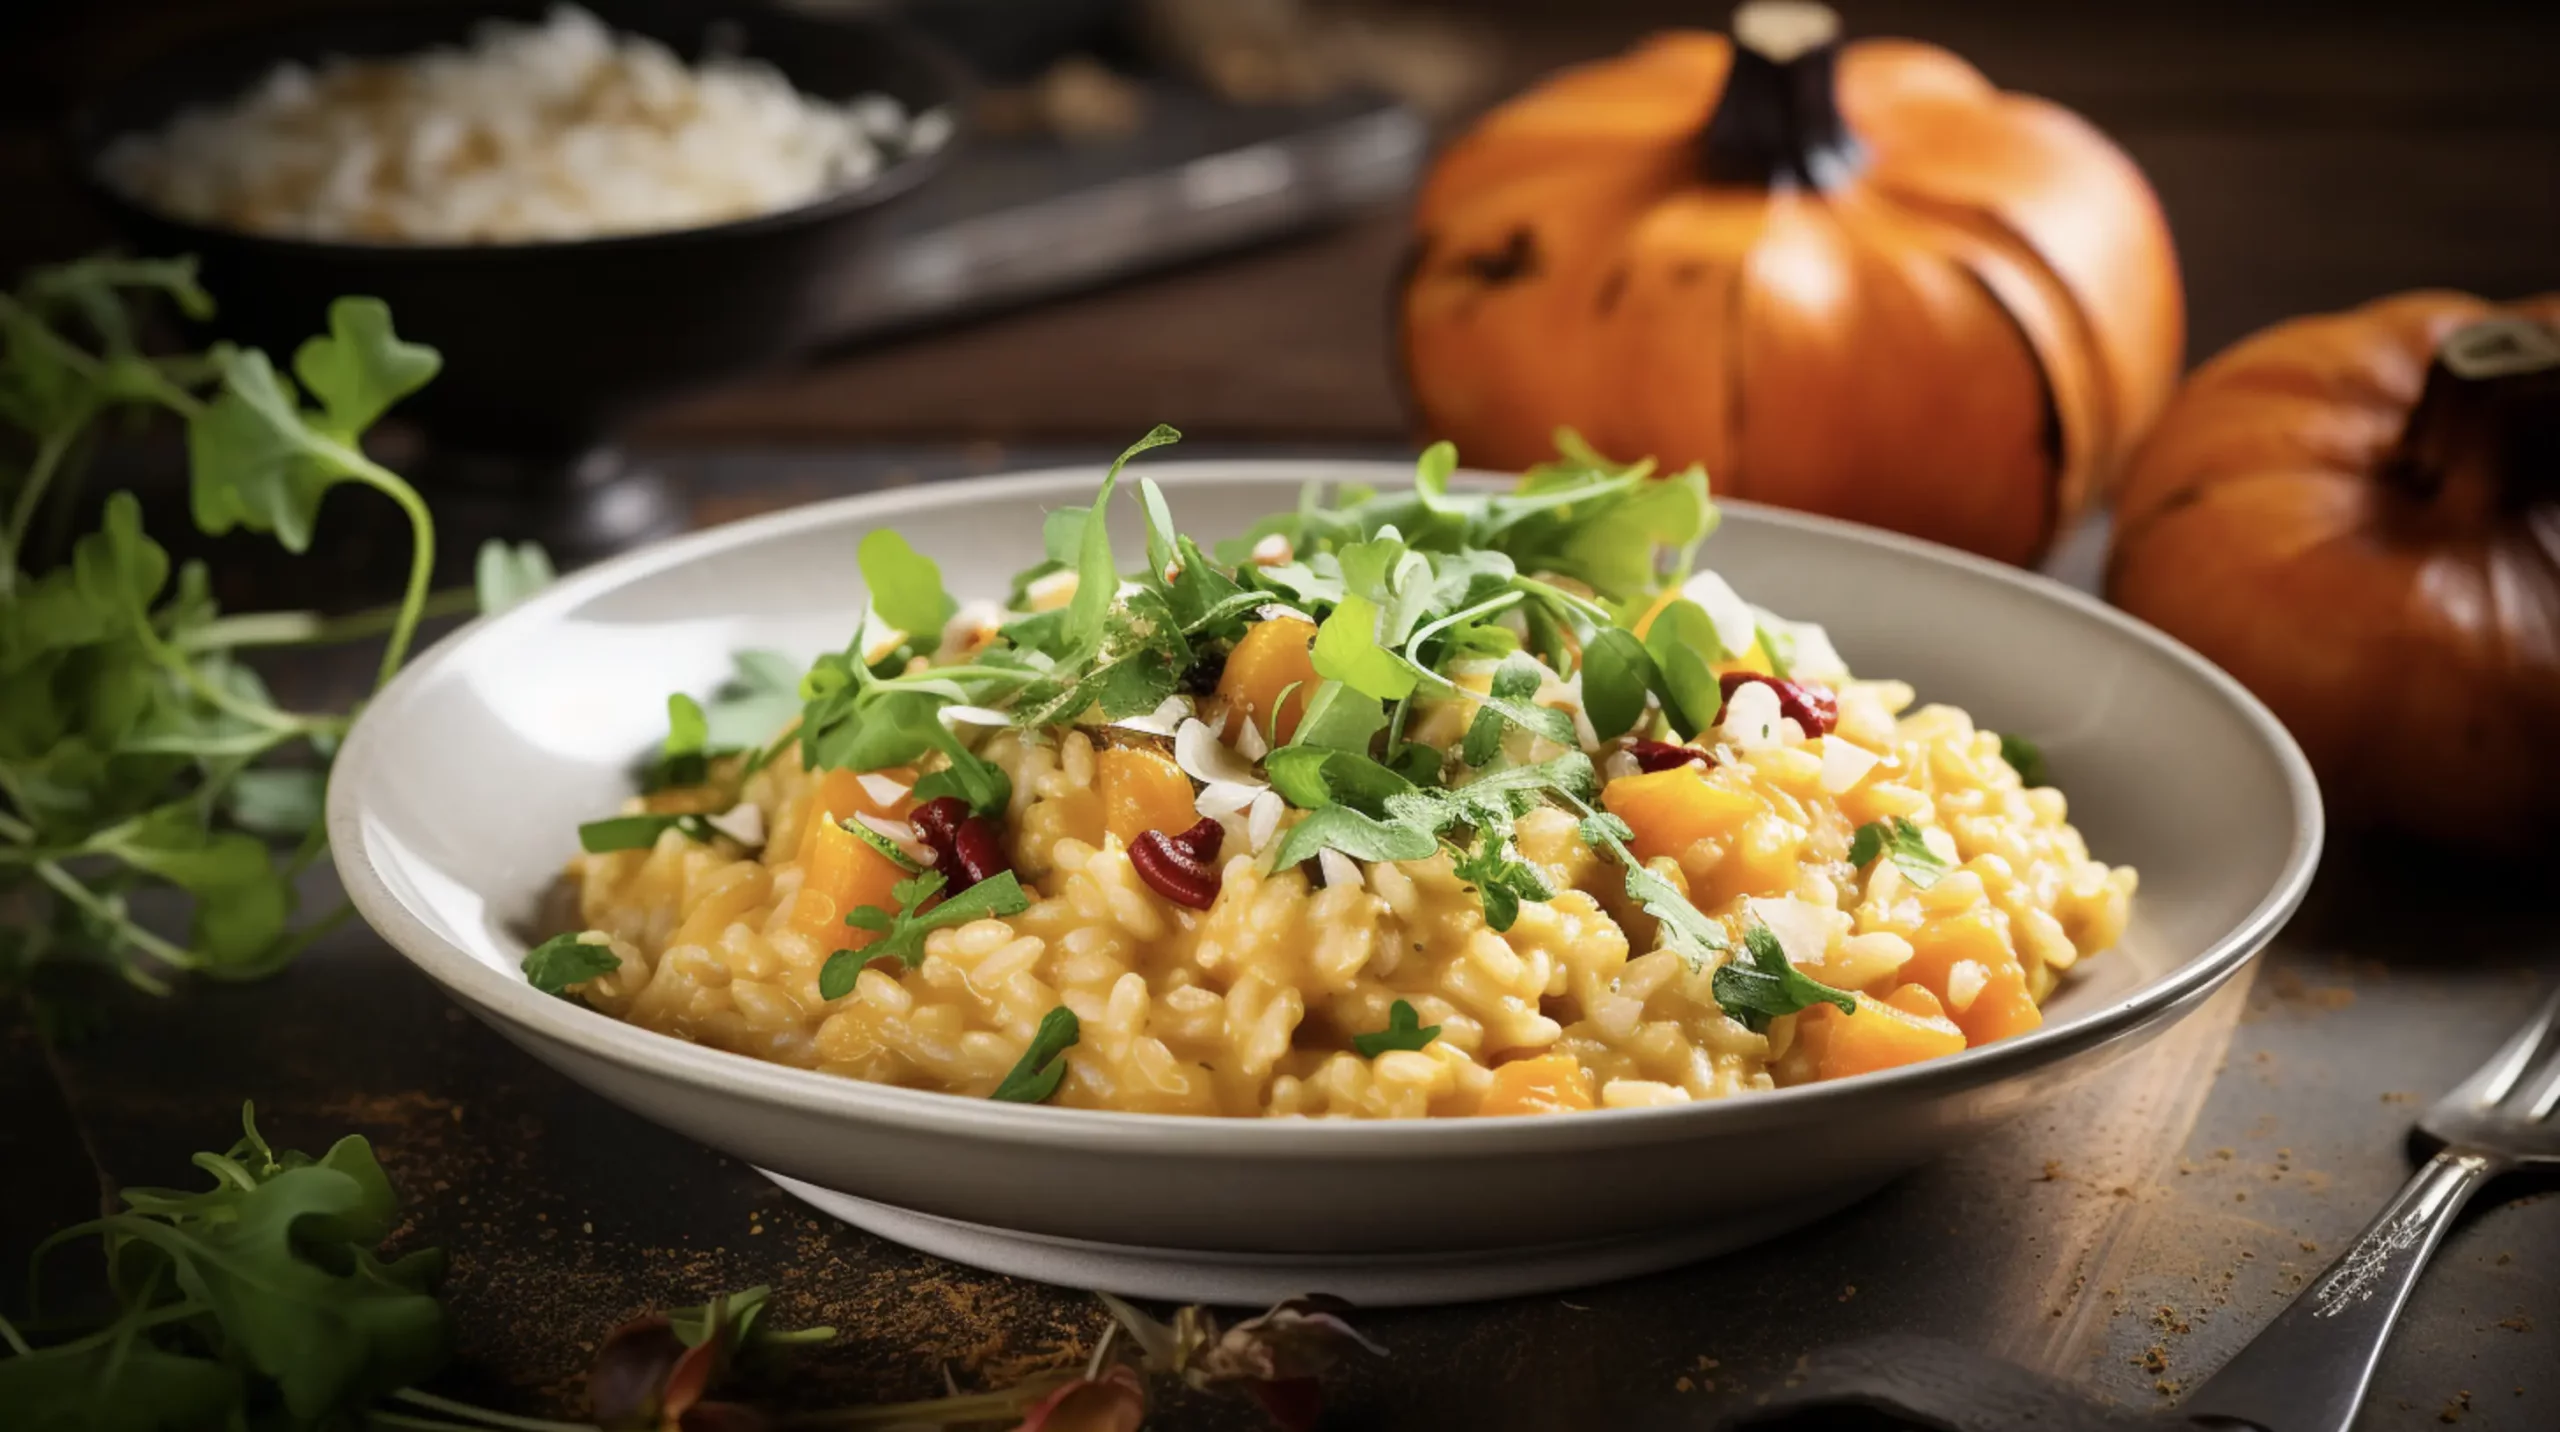 Hearty Butternut Squash Risotto with Leeks and Spinach (Vegan)